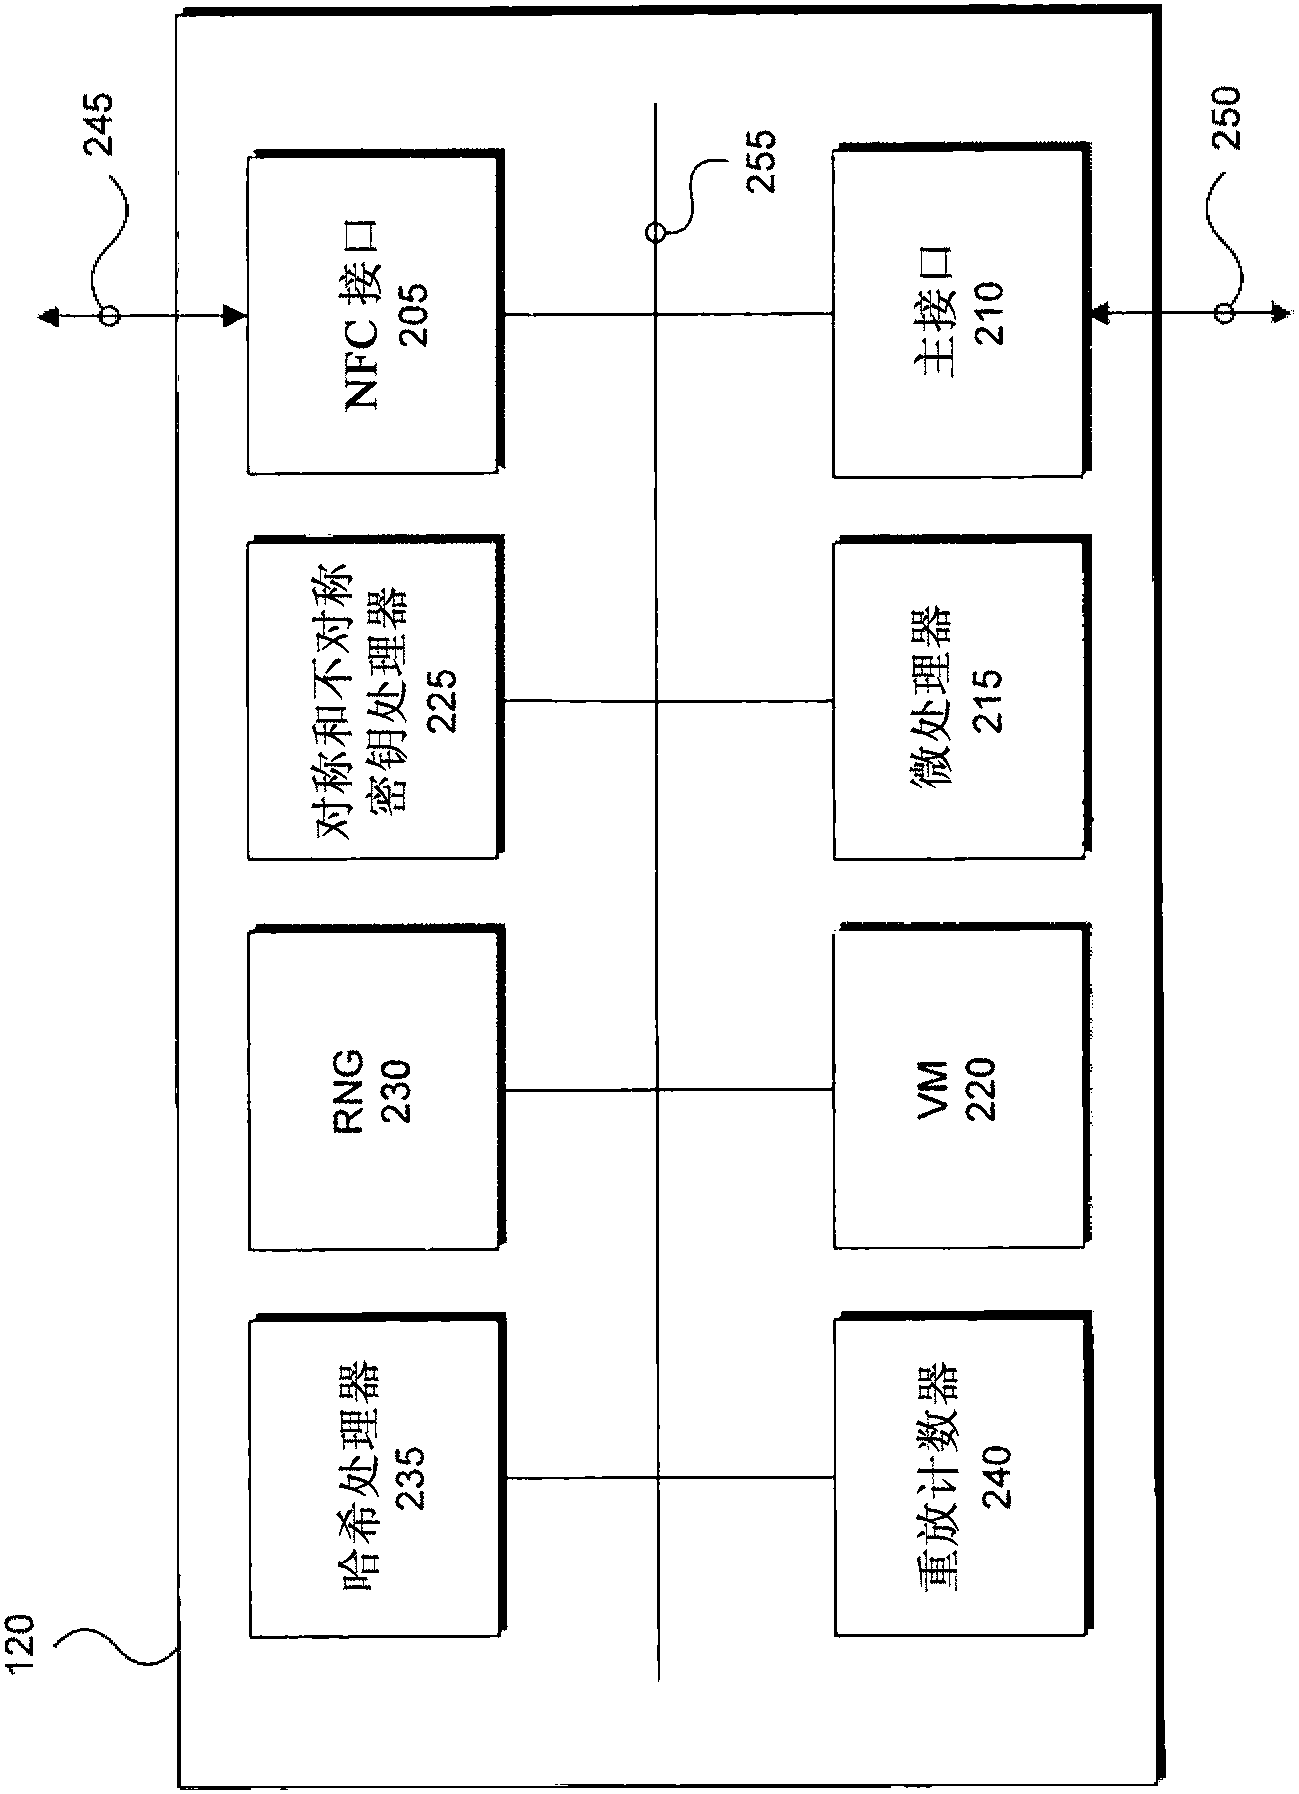 Security architecture for using host memory in the design of a secure element